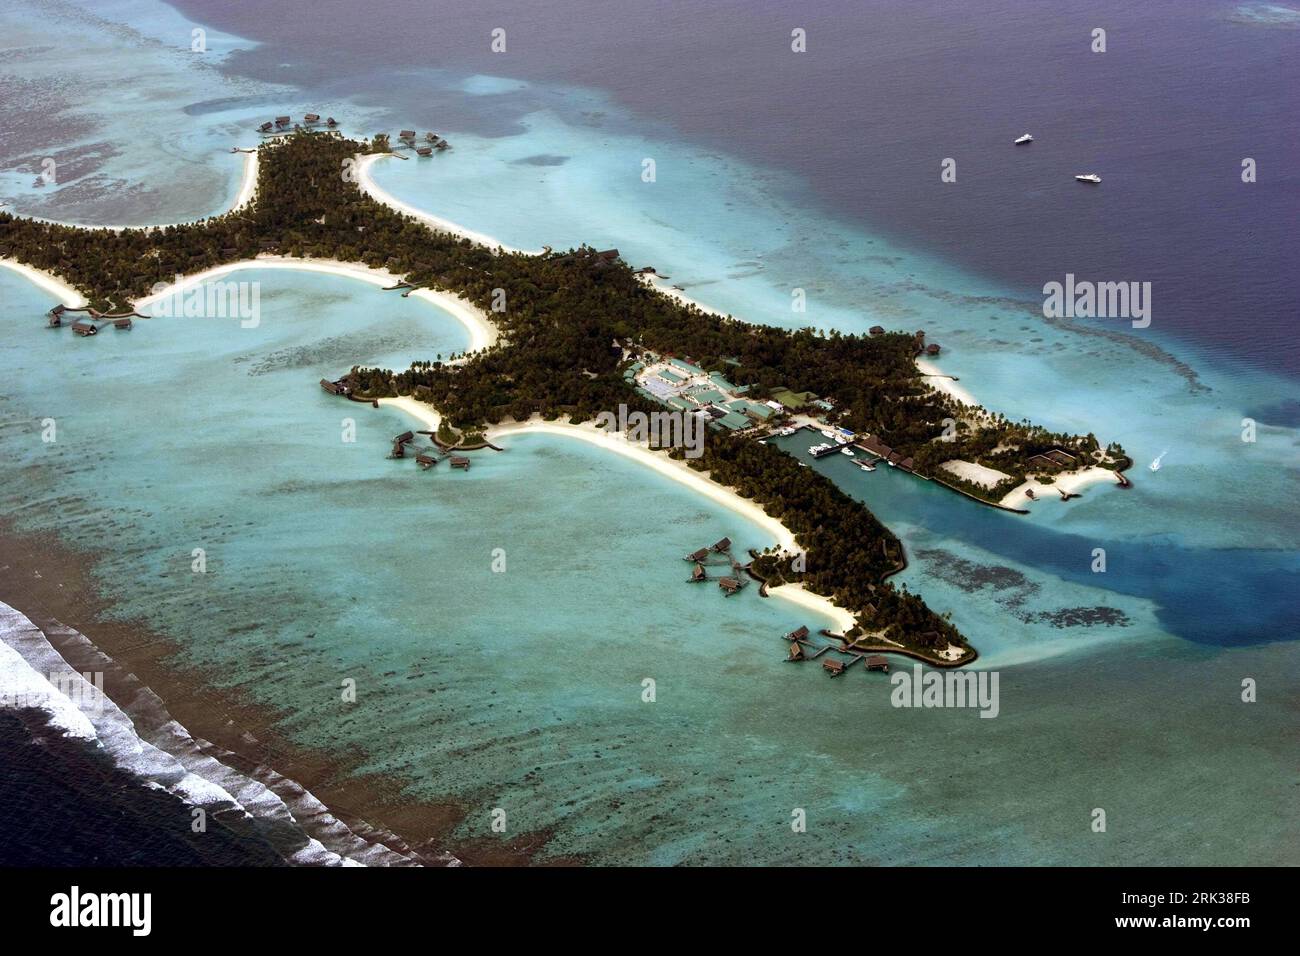 Bildnummer: 53358842  Datum: 14.09.2009  Copyright: imago/Xinhua (090914) -- MALE, Sept. 14, 2009 (Xinhua) -- The aerial photo taken on Sept. 8, 2009 shows an island of Maldives. Some scientists warned that Maldives would be engulfed by the rising sea levels if global warming could not be kept within limits. (Xinhua/Chen Zhanjie) (msq) (3)MALDIVES-CLIMATE CHANGE-WARNING PUBLICATIONxNOTxINxCHN kbdig xkg 2009 quer o0 Landschaft Reisen Insel Meer Luftbild o00 Vogelperspektive    Bildnummer 53358842 Date 14 09 2009 Copyright Imago XINHUA  Male Sept 14 2009 XINHUA The Aerial Photo Taken ON Sept 8 2 Stock Photo